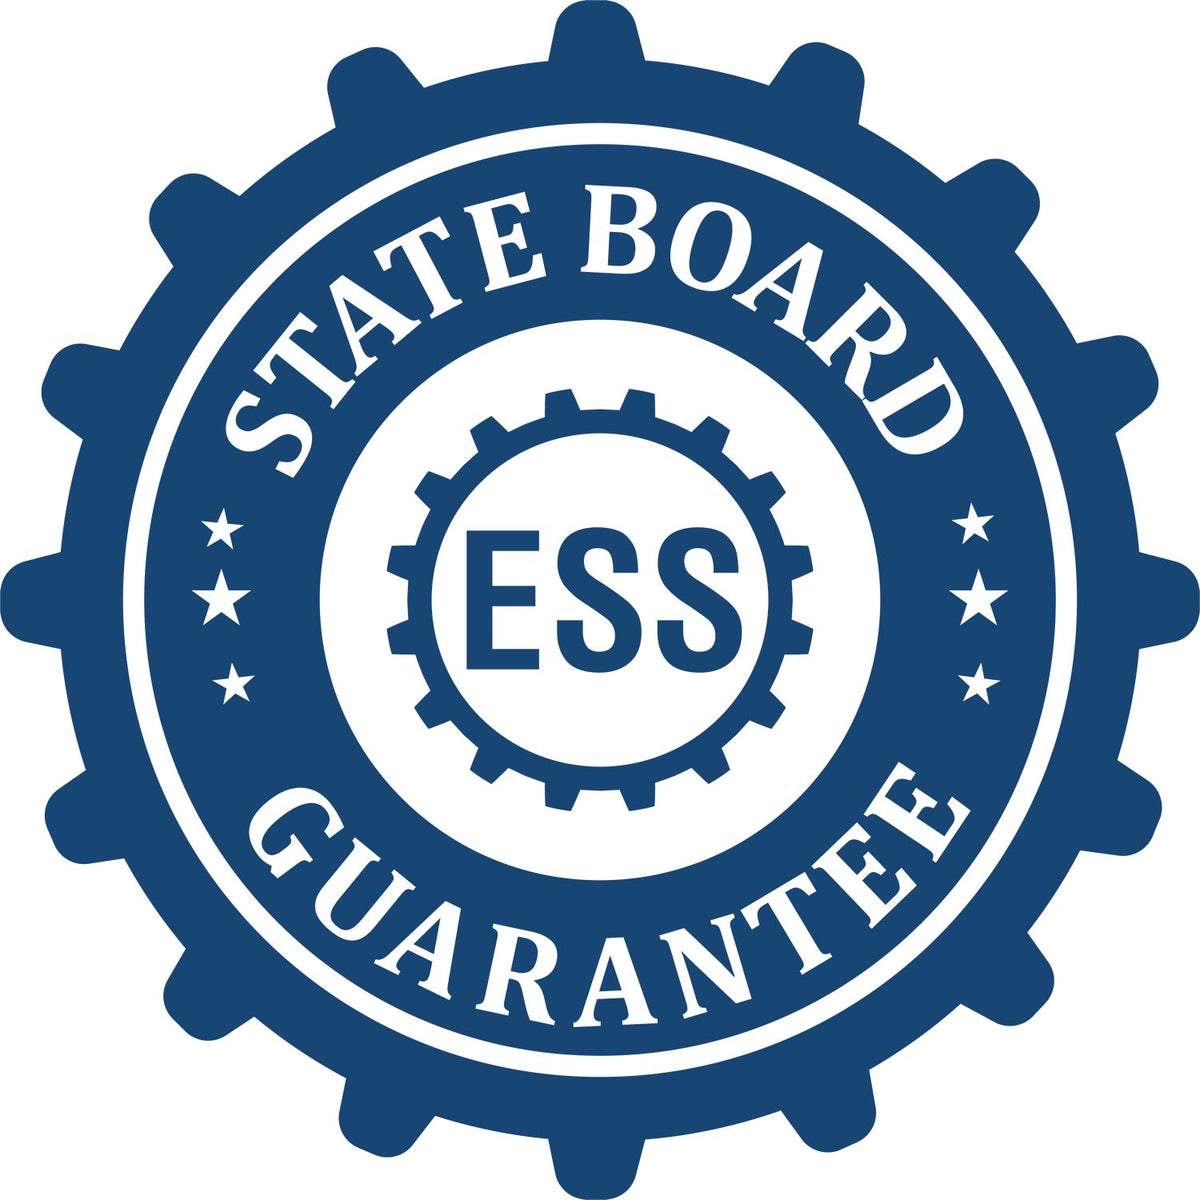 An emblem in a gear shape illustrating a state board guarantee for the Minnesota Landscape Architectural Seal Stamp product.